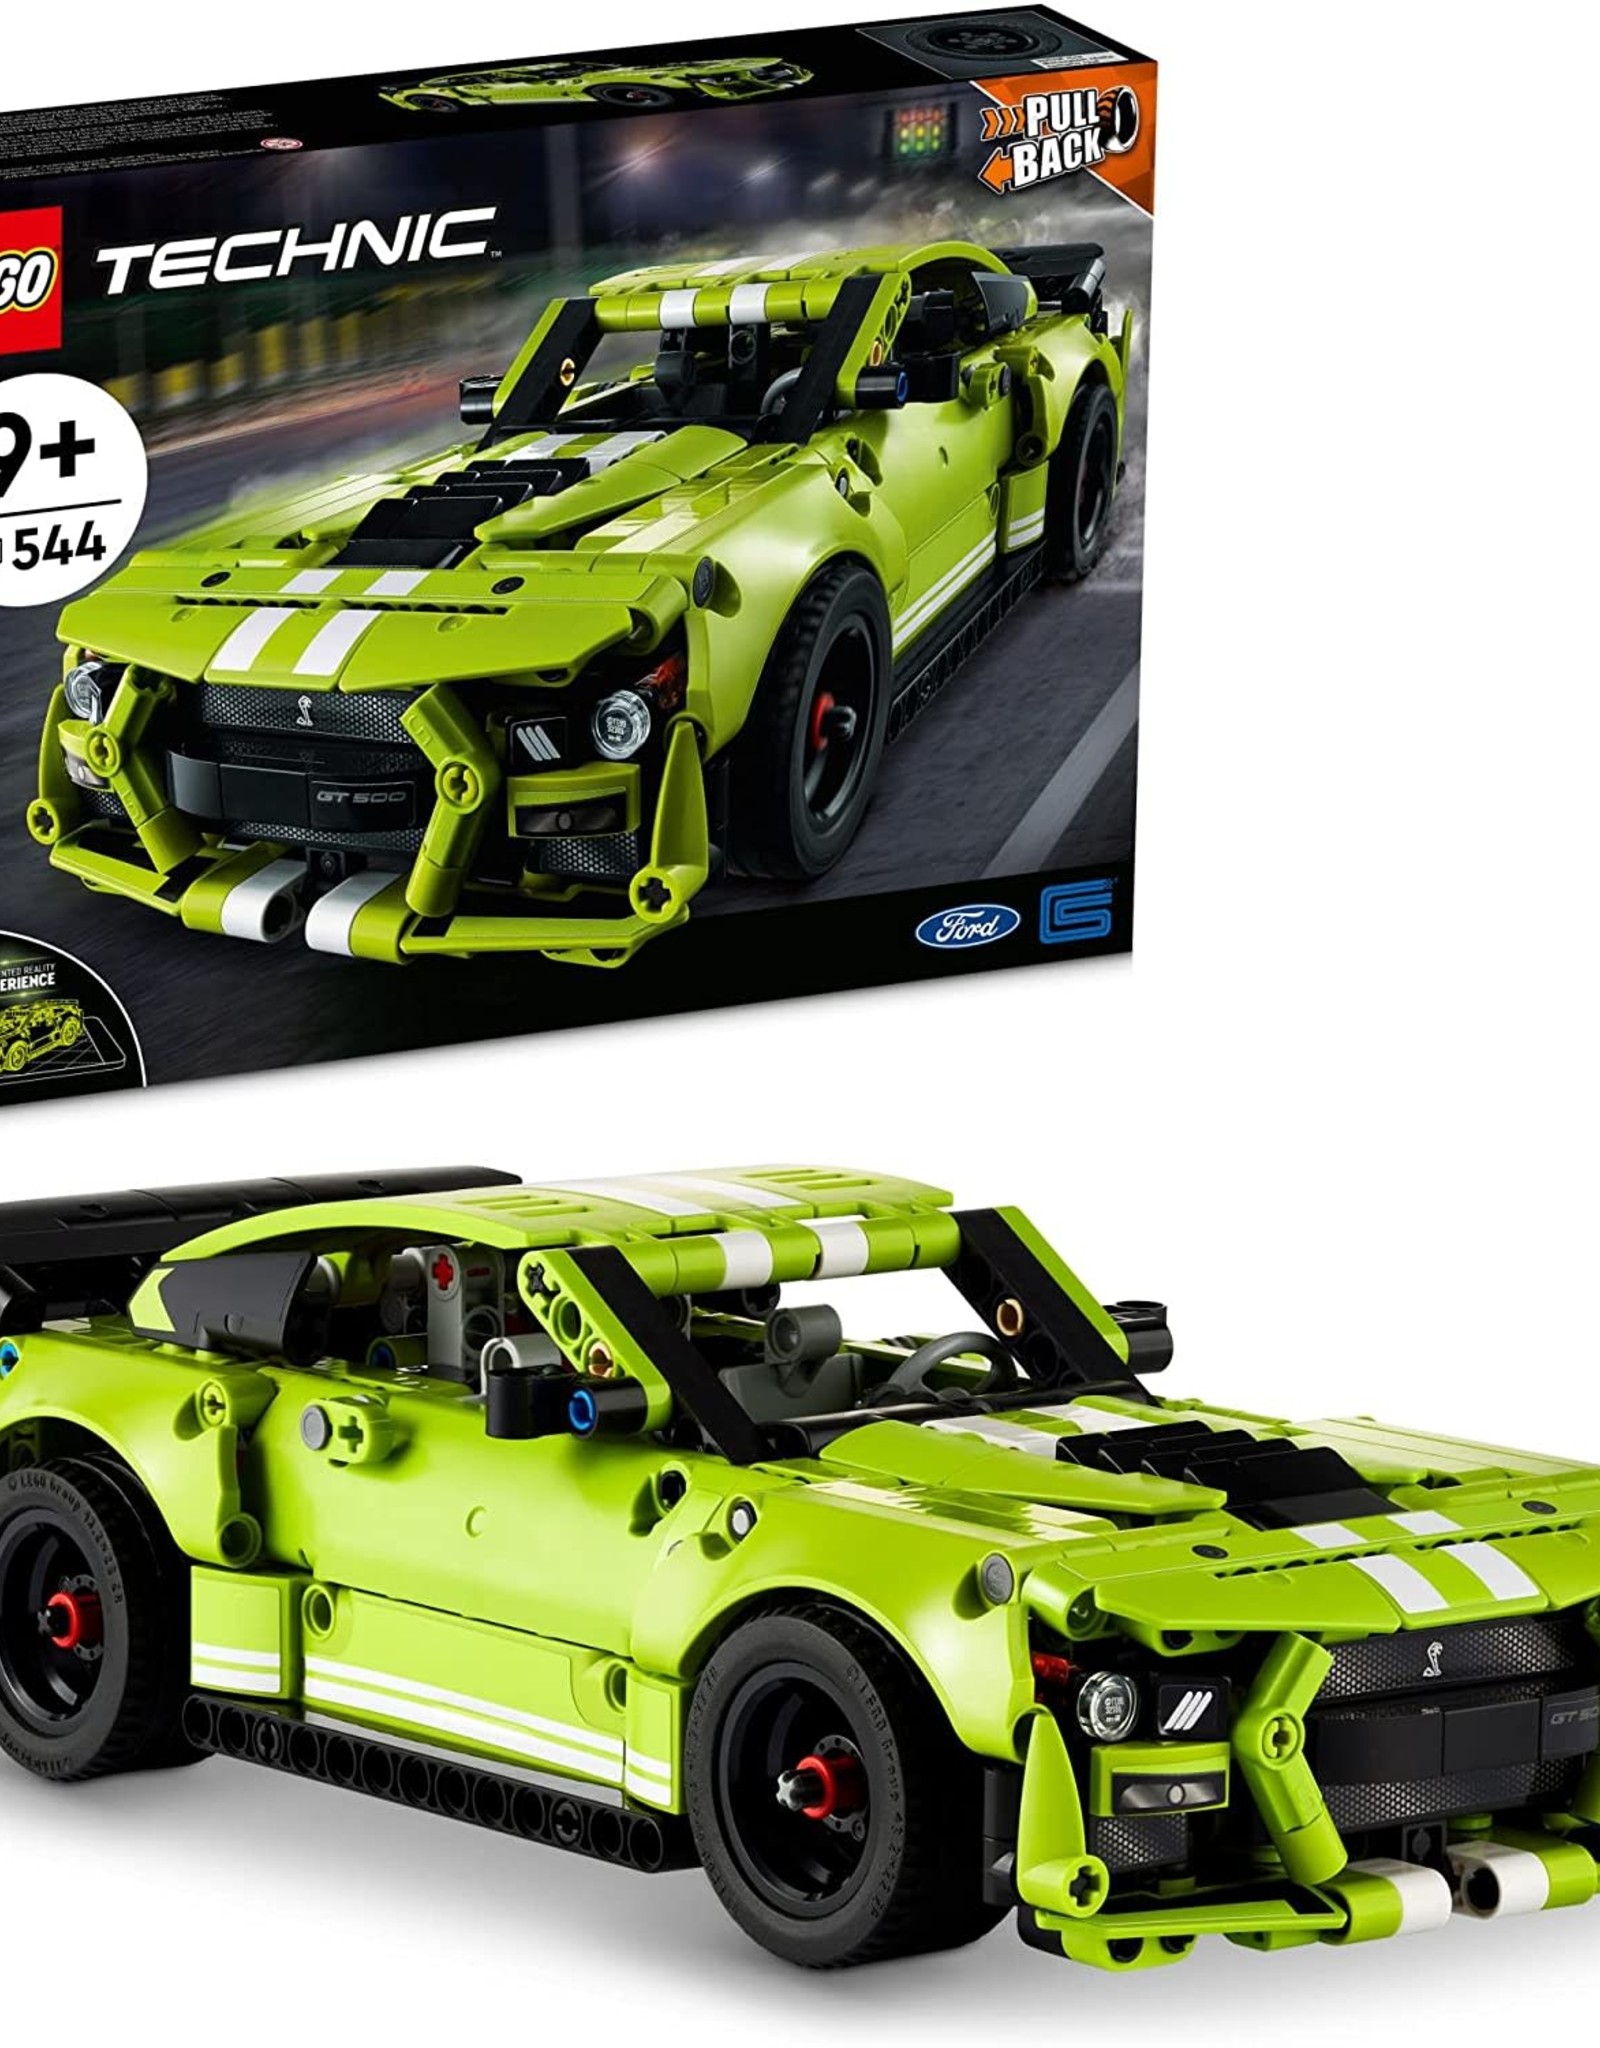 LEGO Lego Technic Ford Mustang Shelby GT500